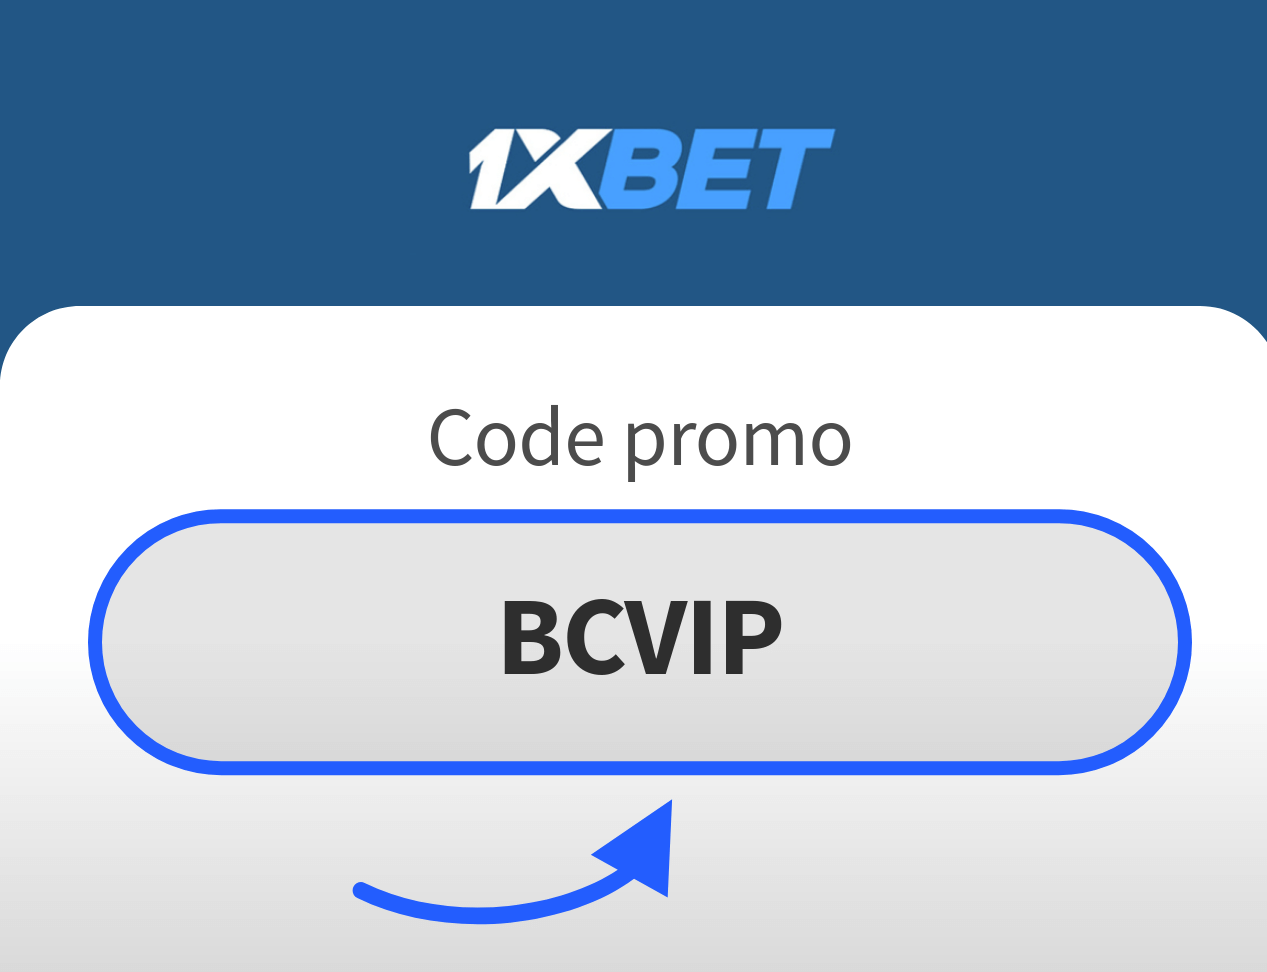 1XBET Code Promotionnel